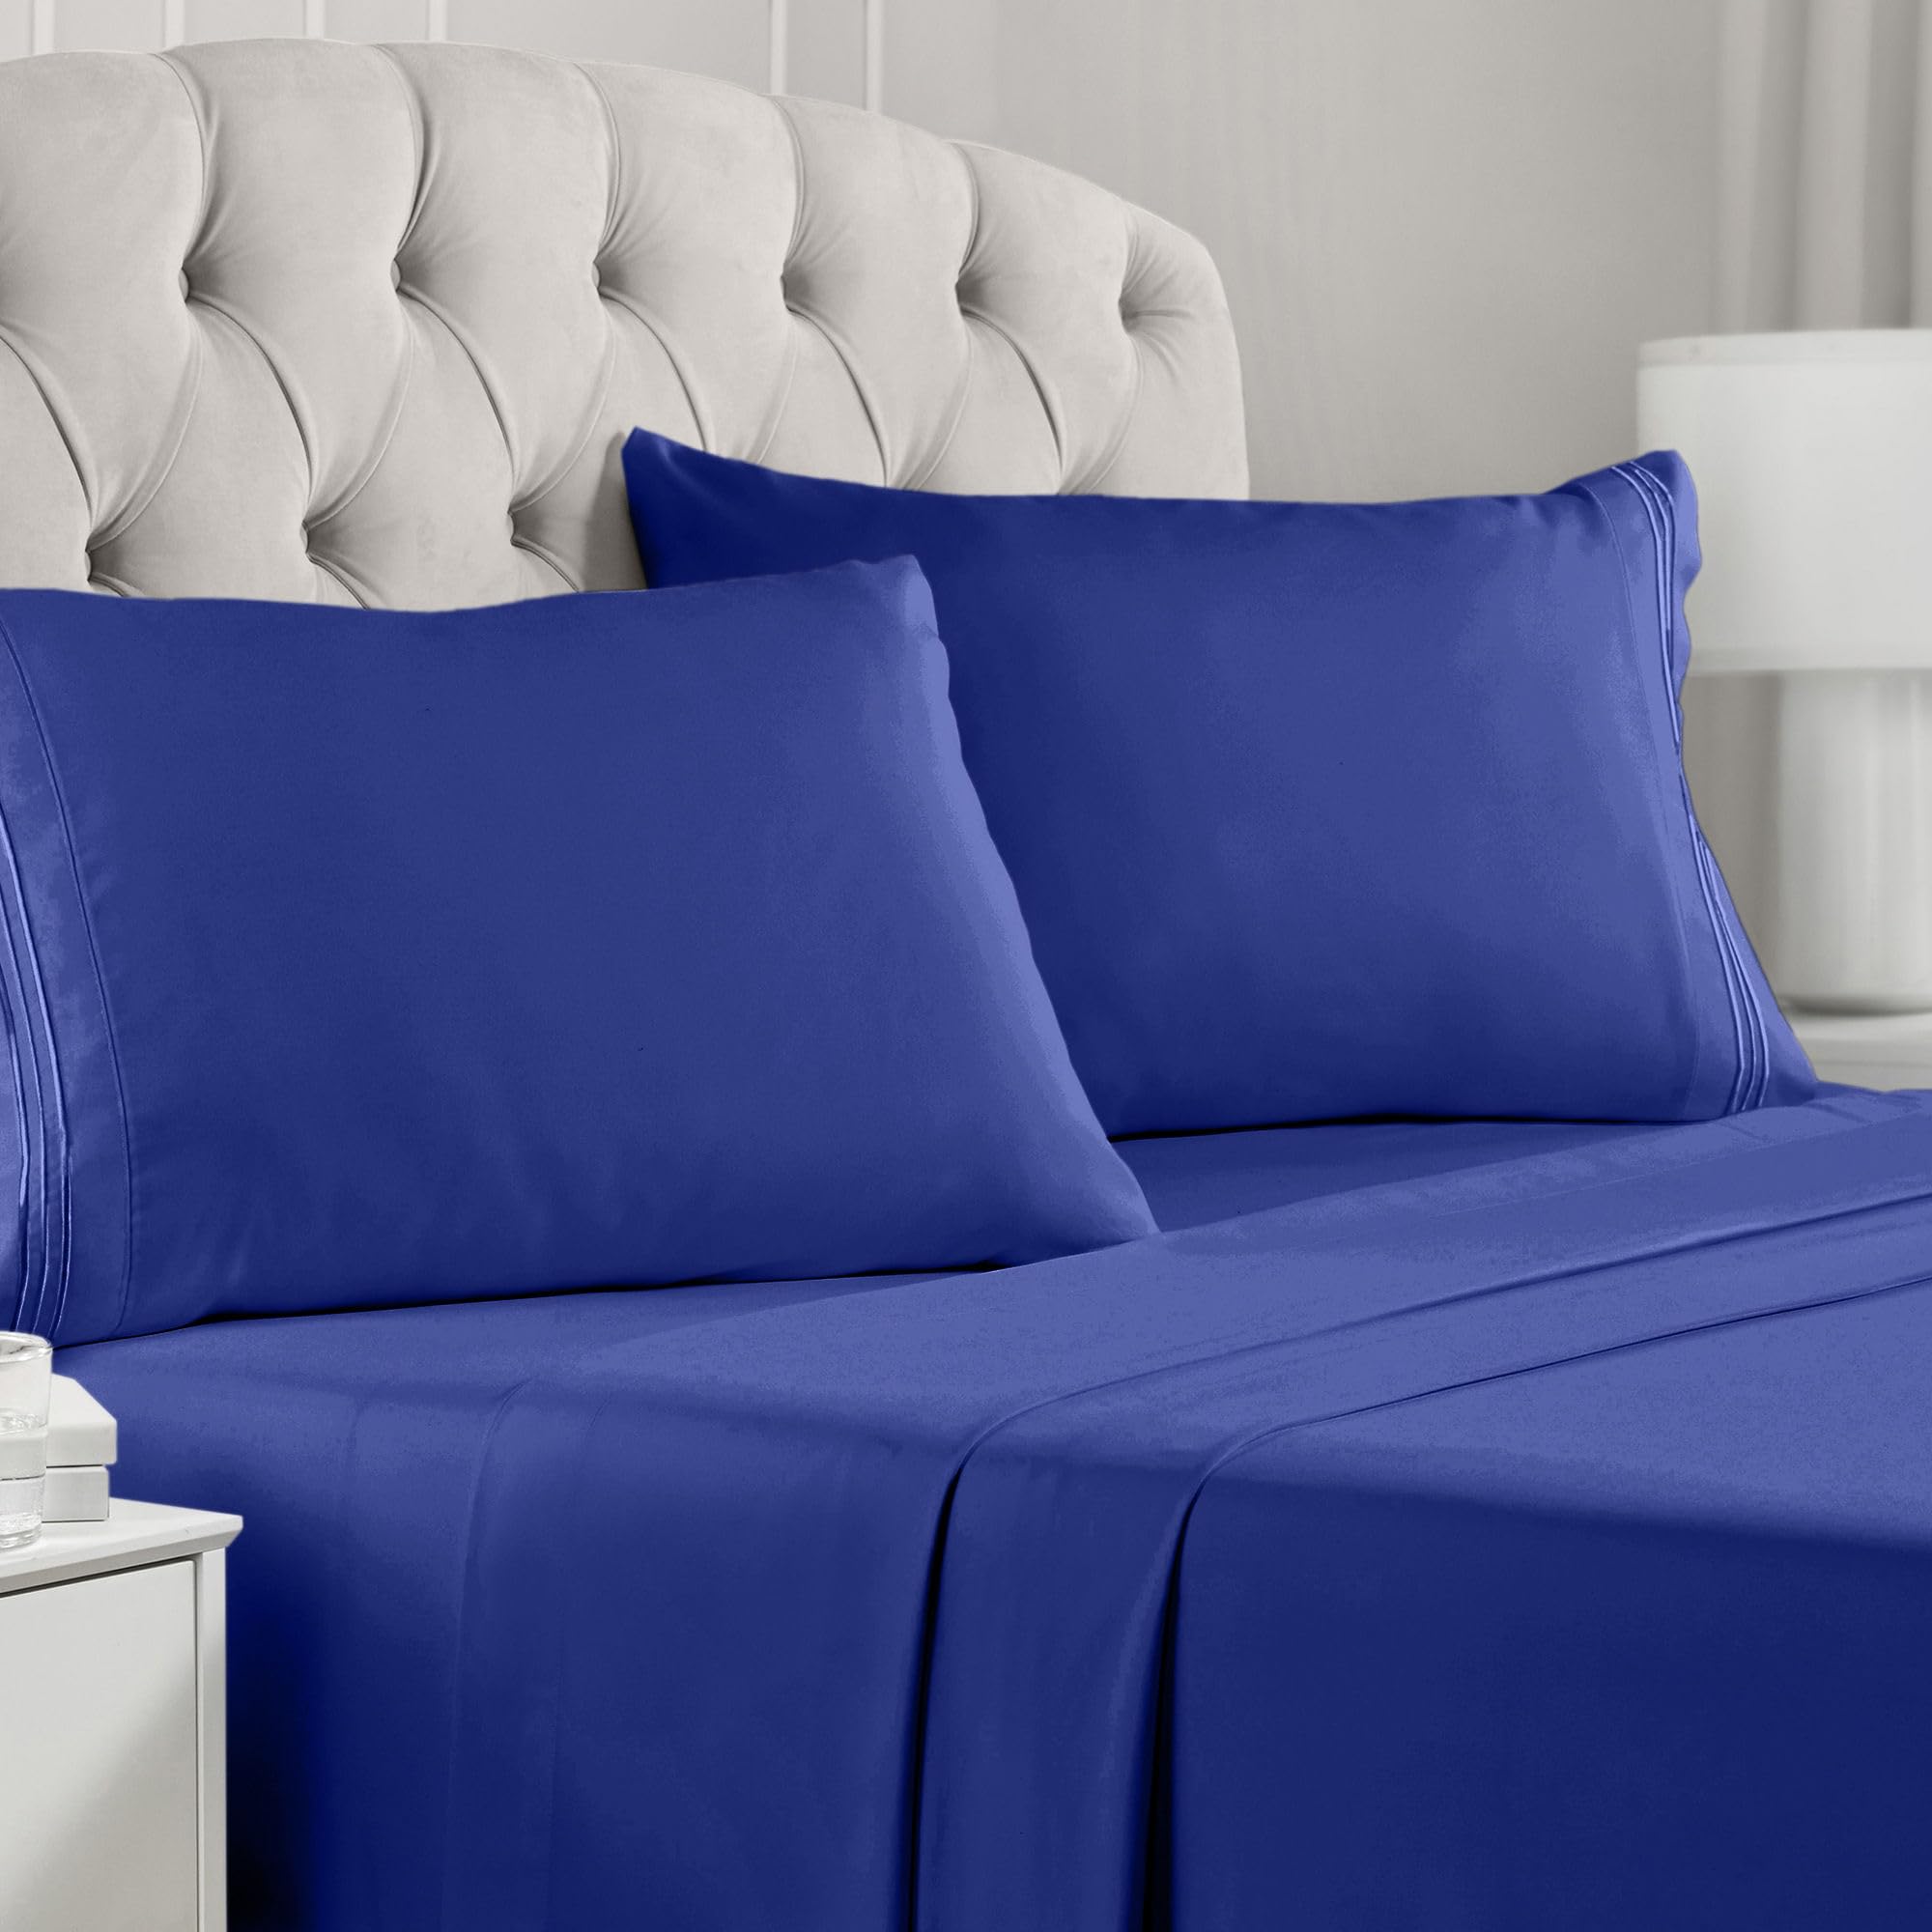 Book Cover Mellanni California King Sheets - Hotel Luxury 1800 Bedding Sheets & Pillowcases - Extra Soft Cooling Bed Sheets - Deep Pocket up to 16 inch Mattress - Easy Care - 4 Piece (Cal King, Imperial Blue)